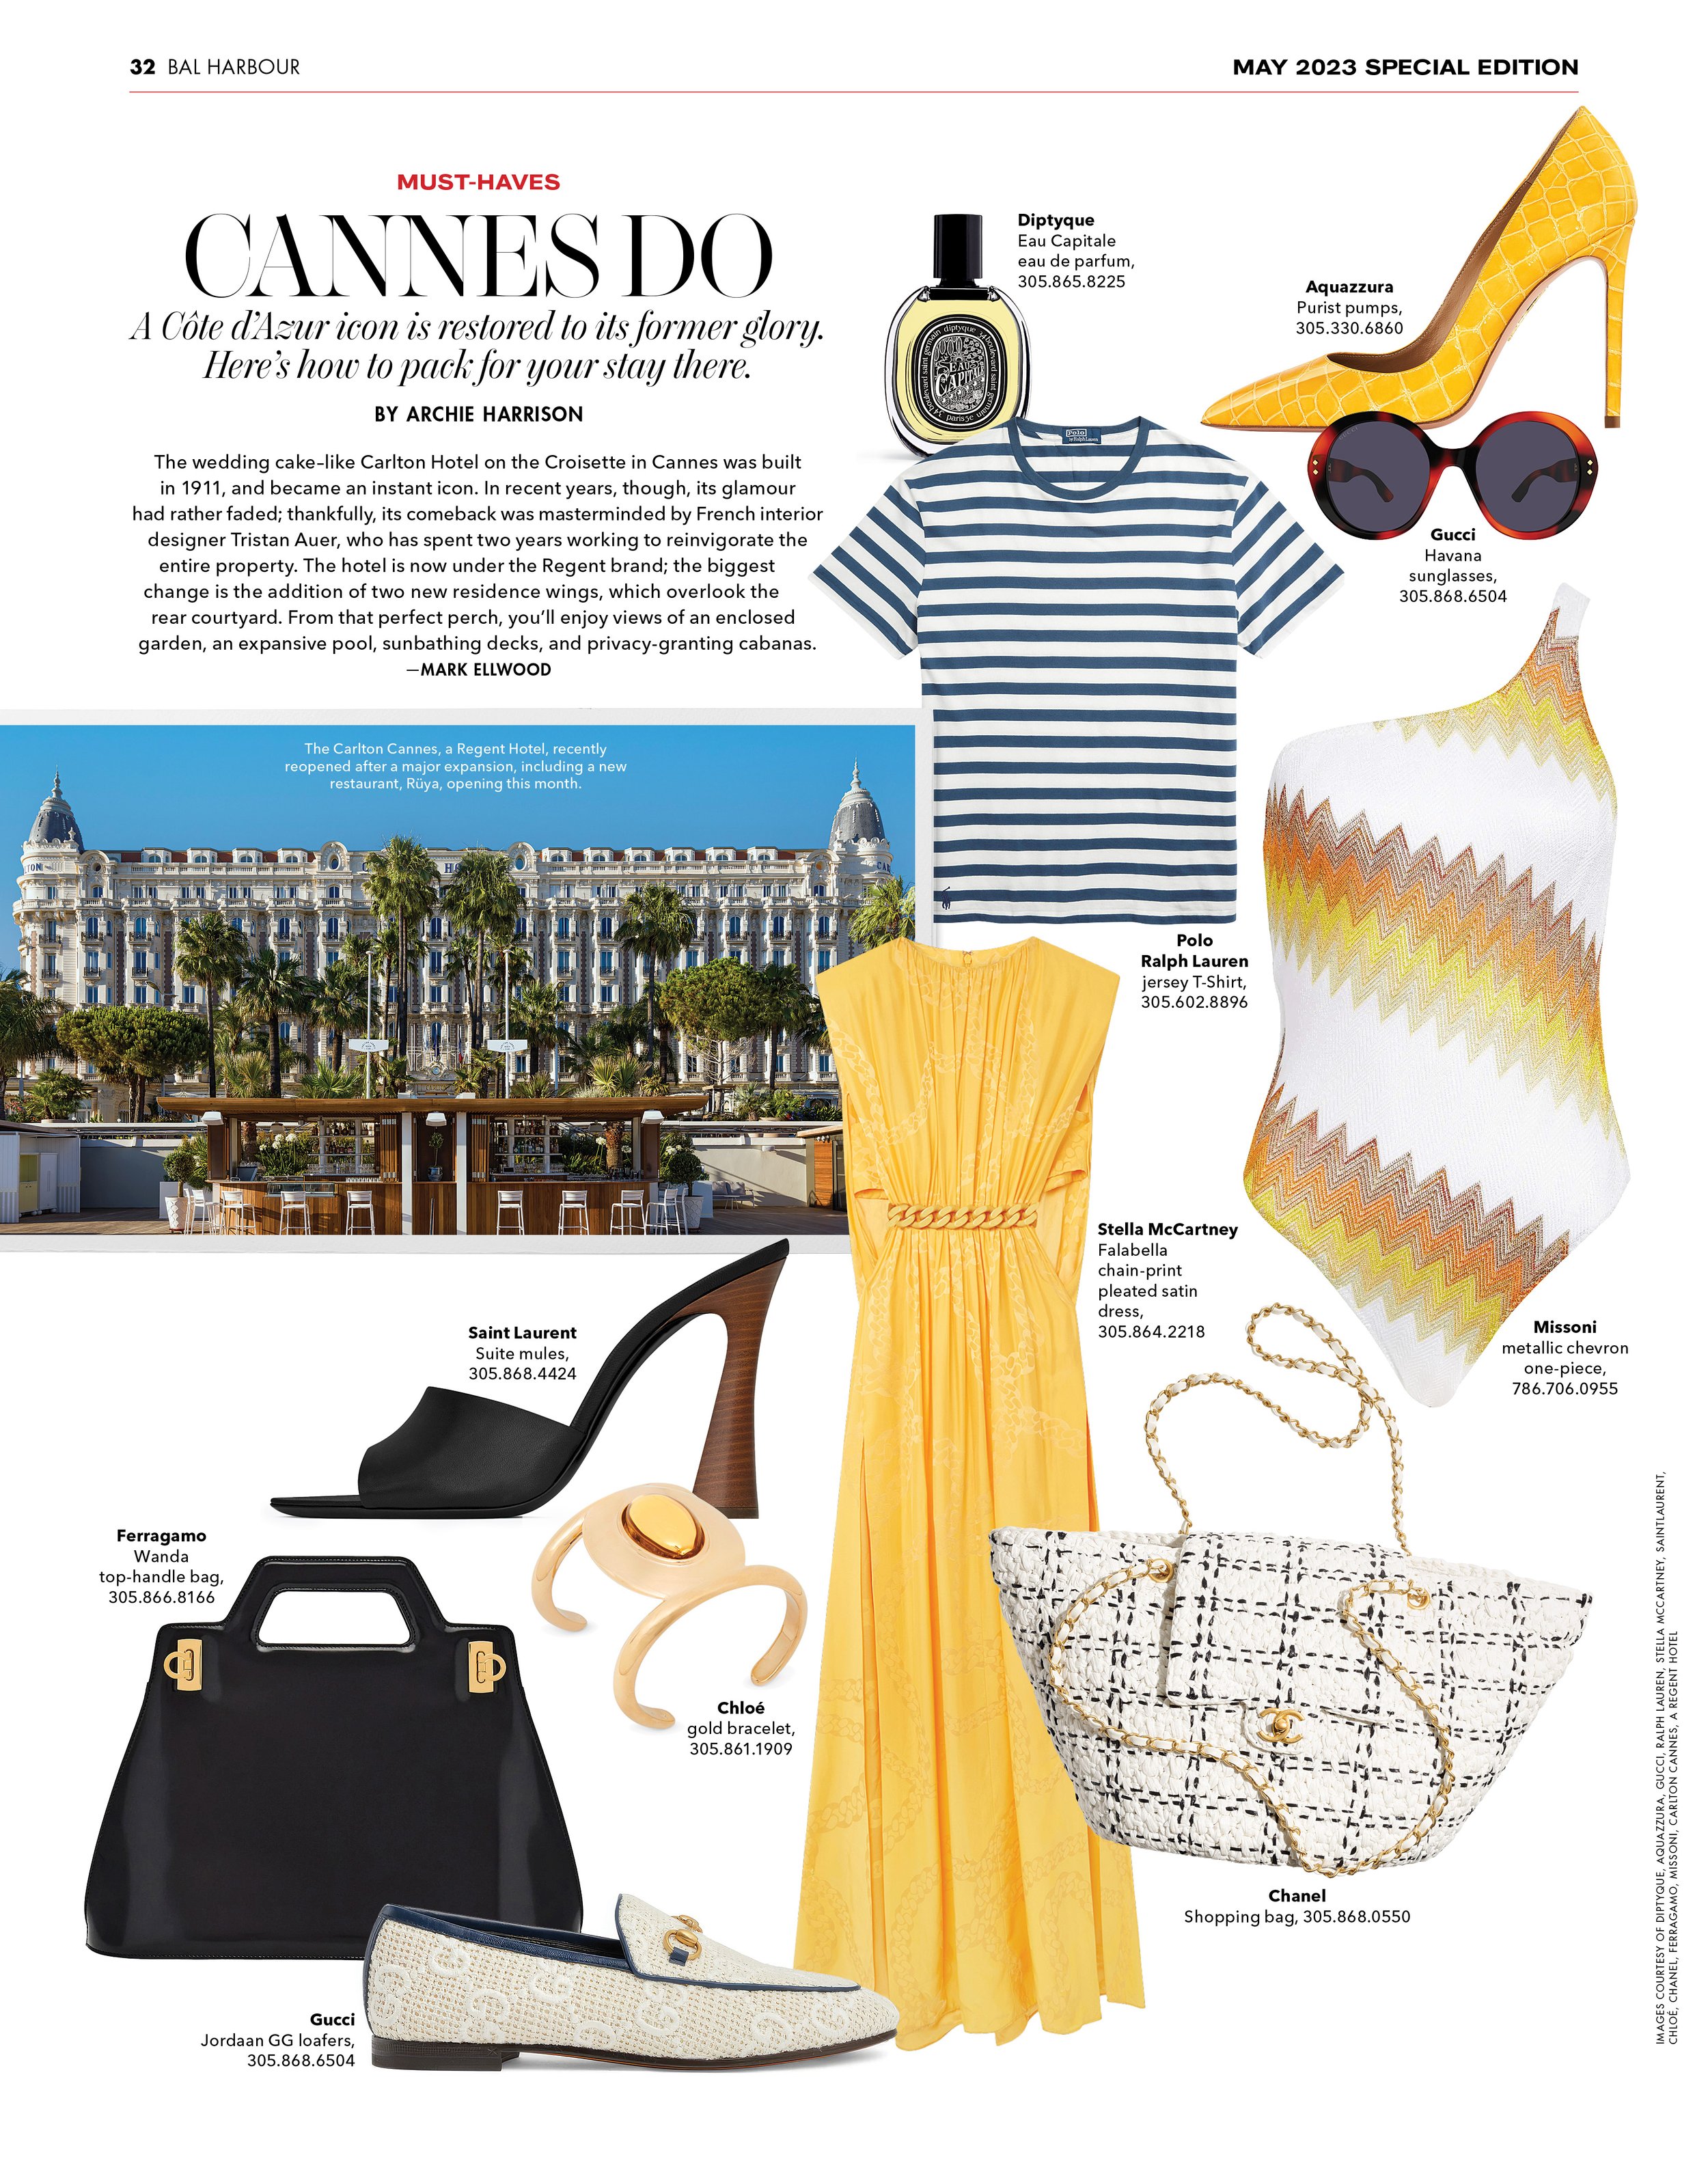 BH_SUMMER2023_MUST-HAVES-CANNES.jpg